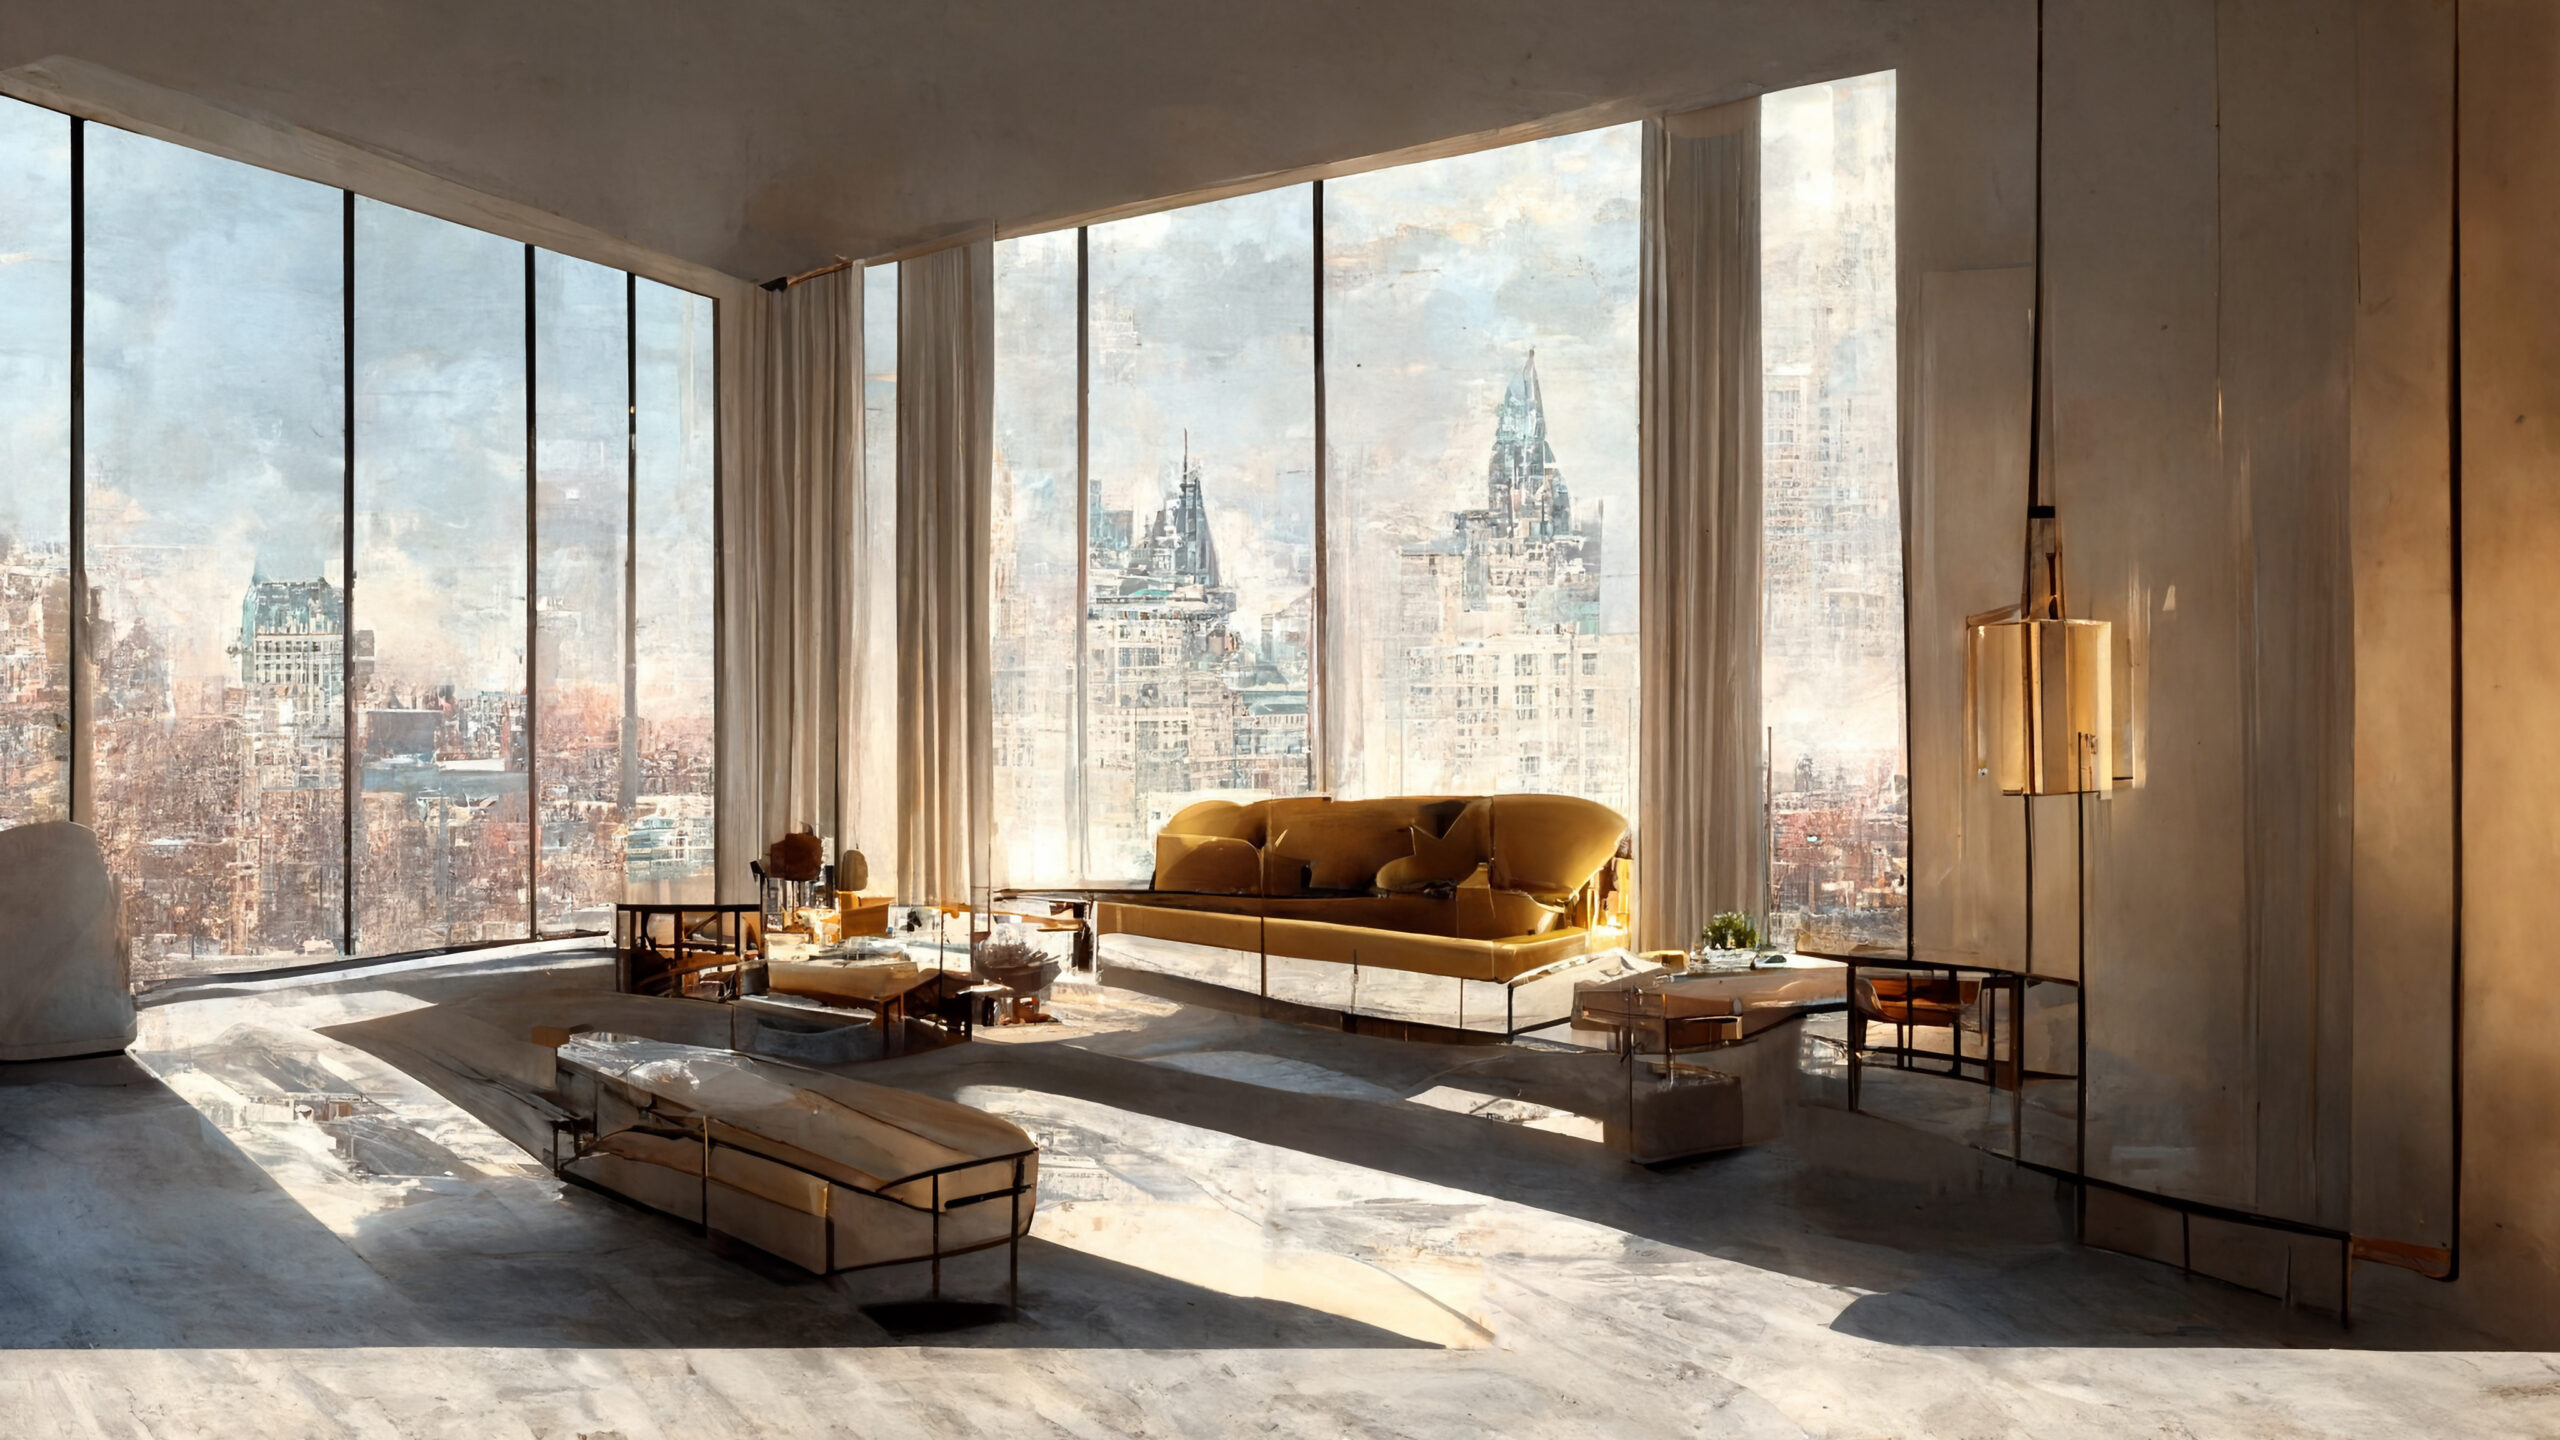 7 Tips for Purchasing a Manhattan Luxury Apartment New York City